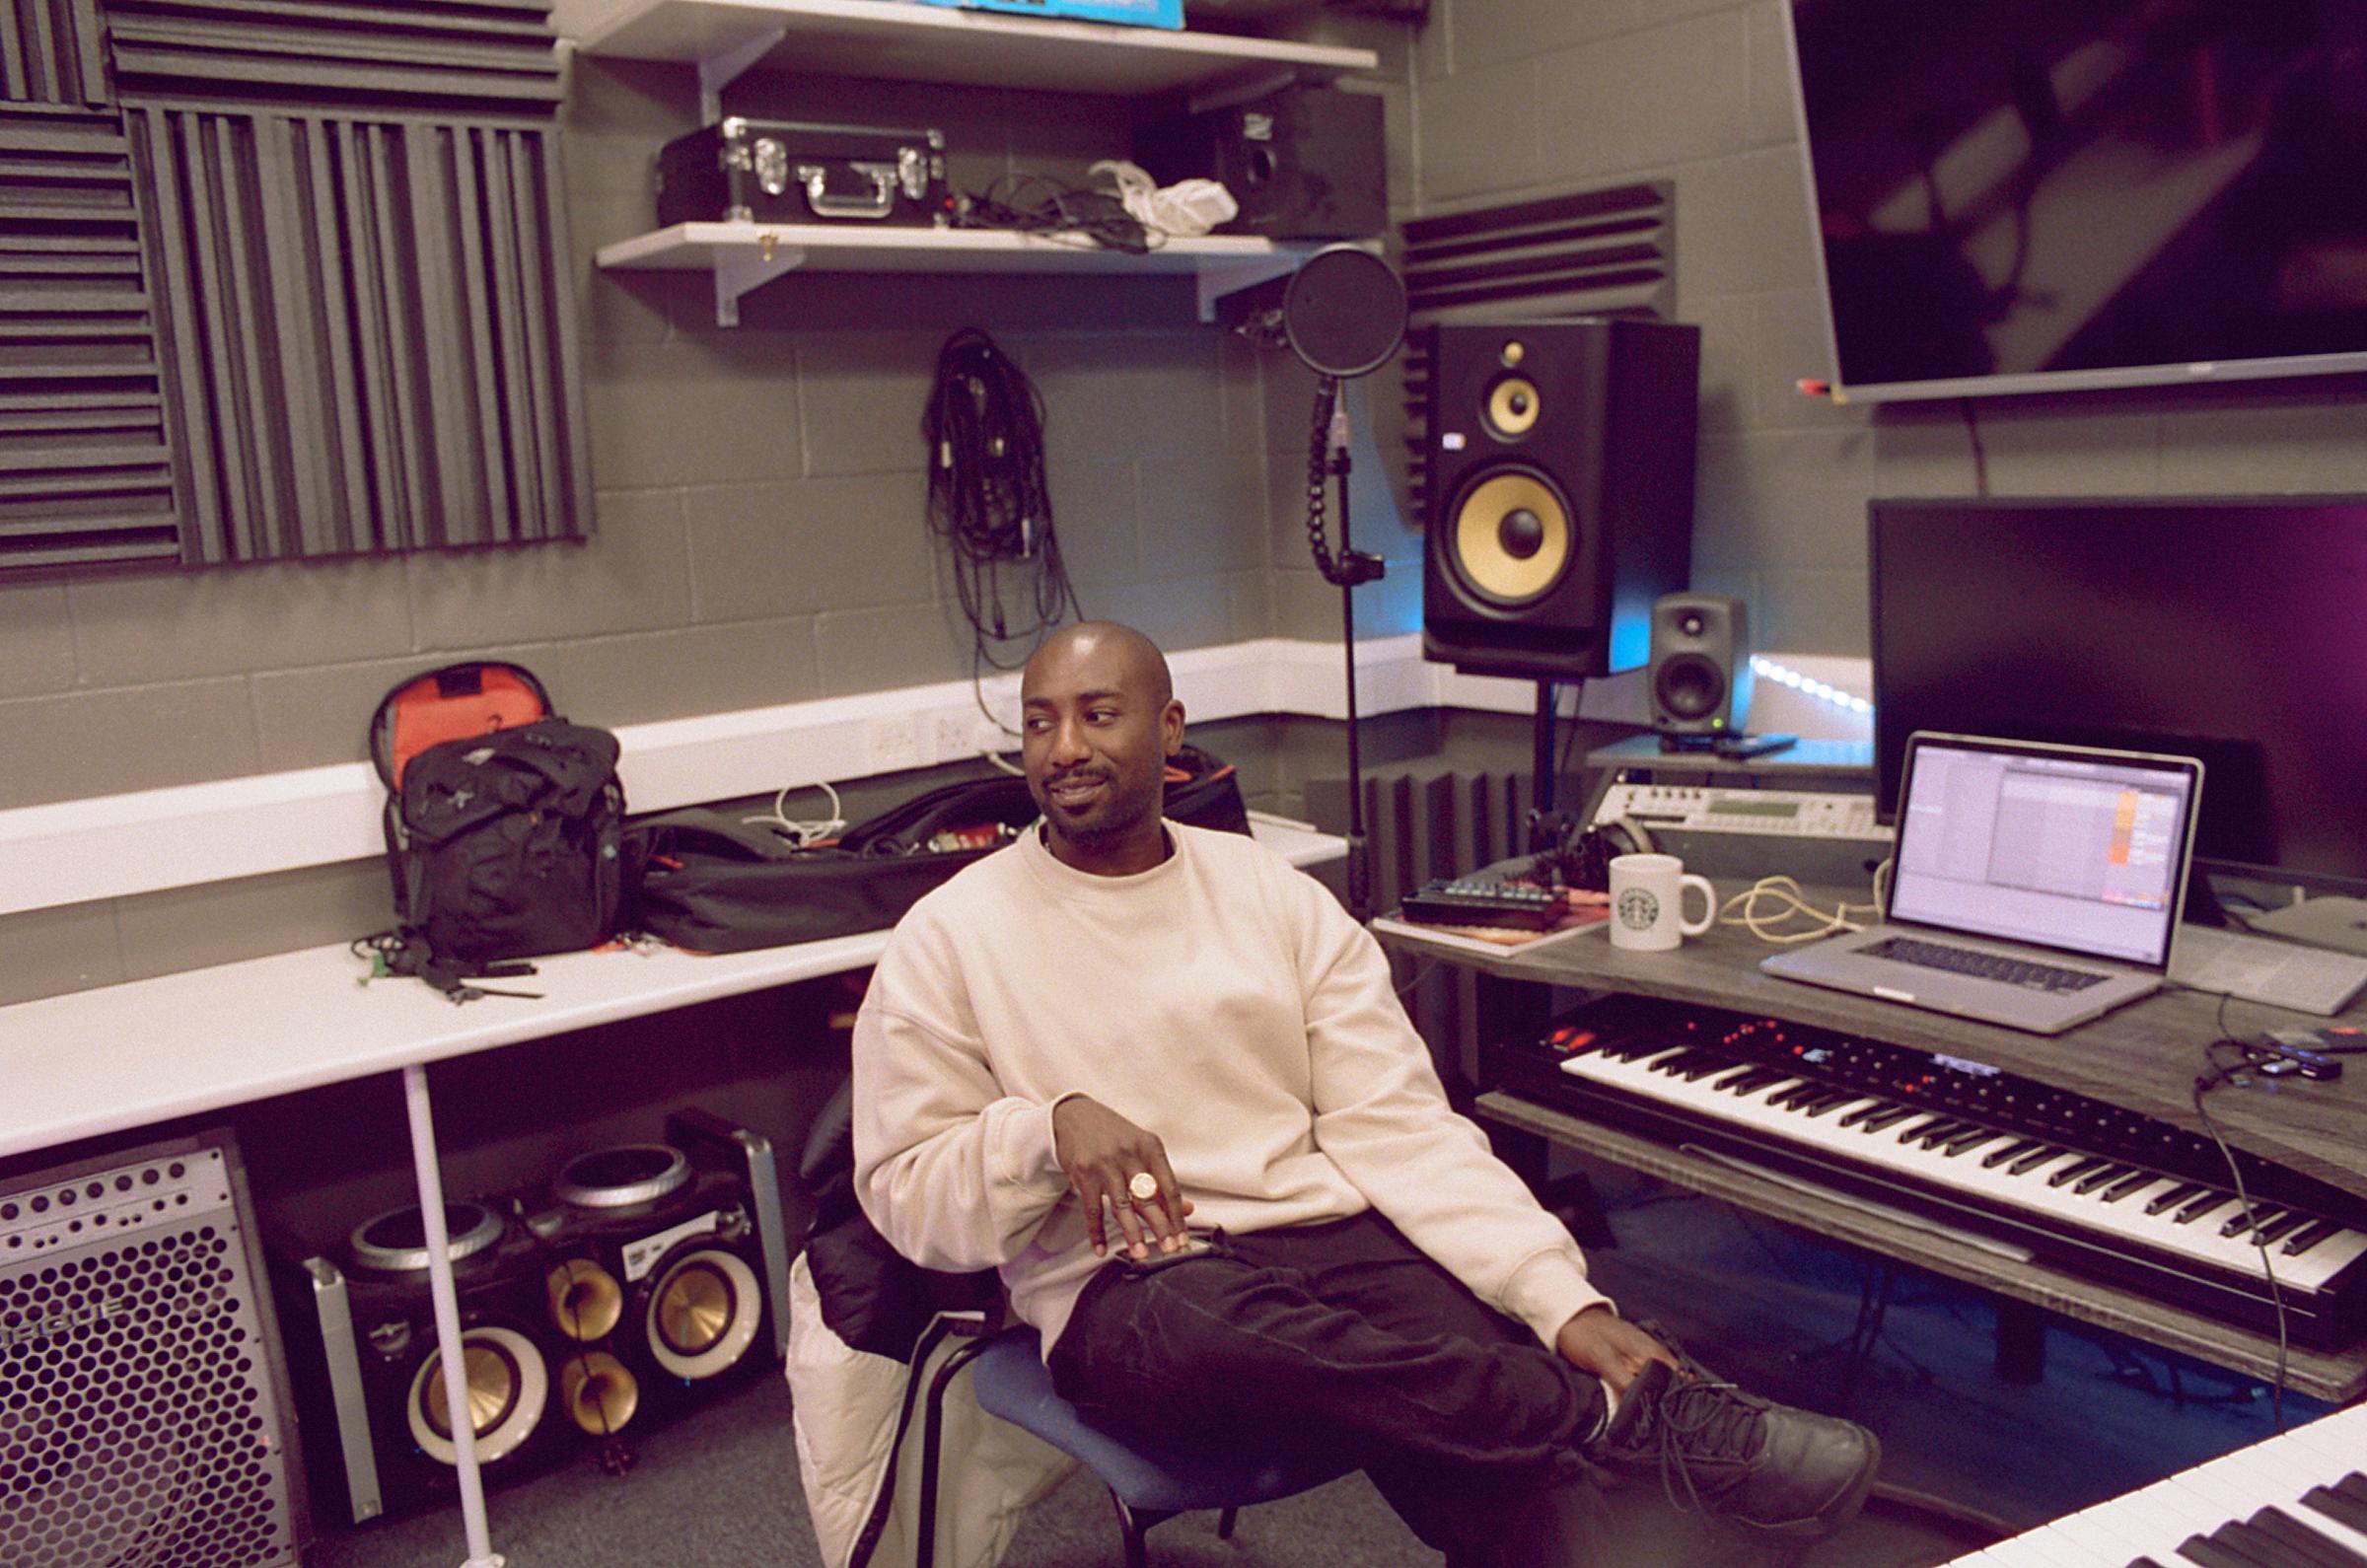 Music producer in a music studio sat on a chair.